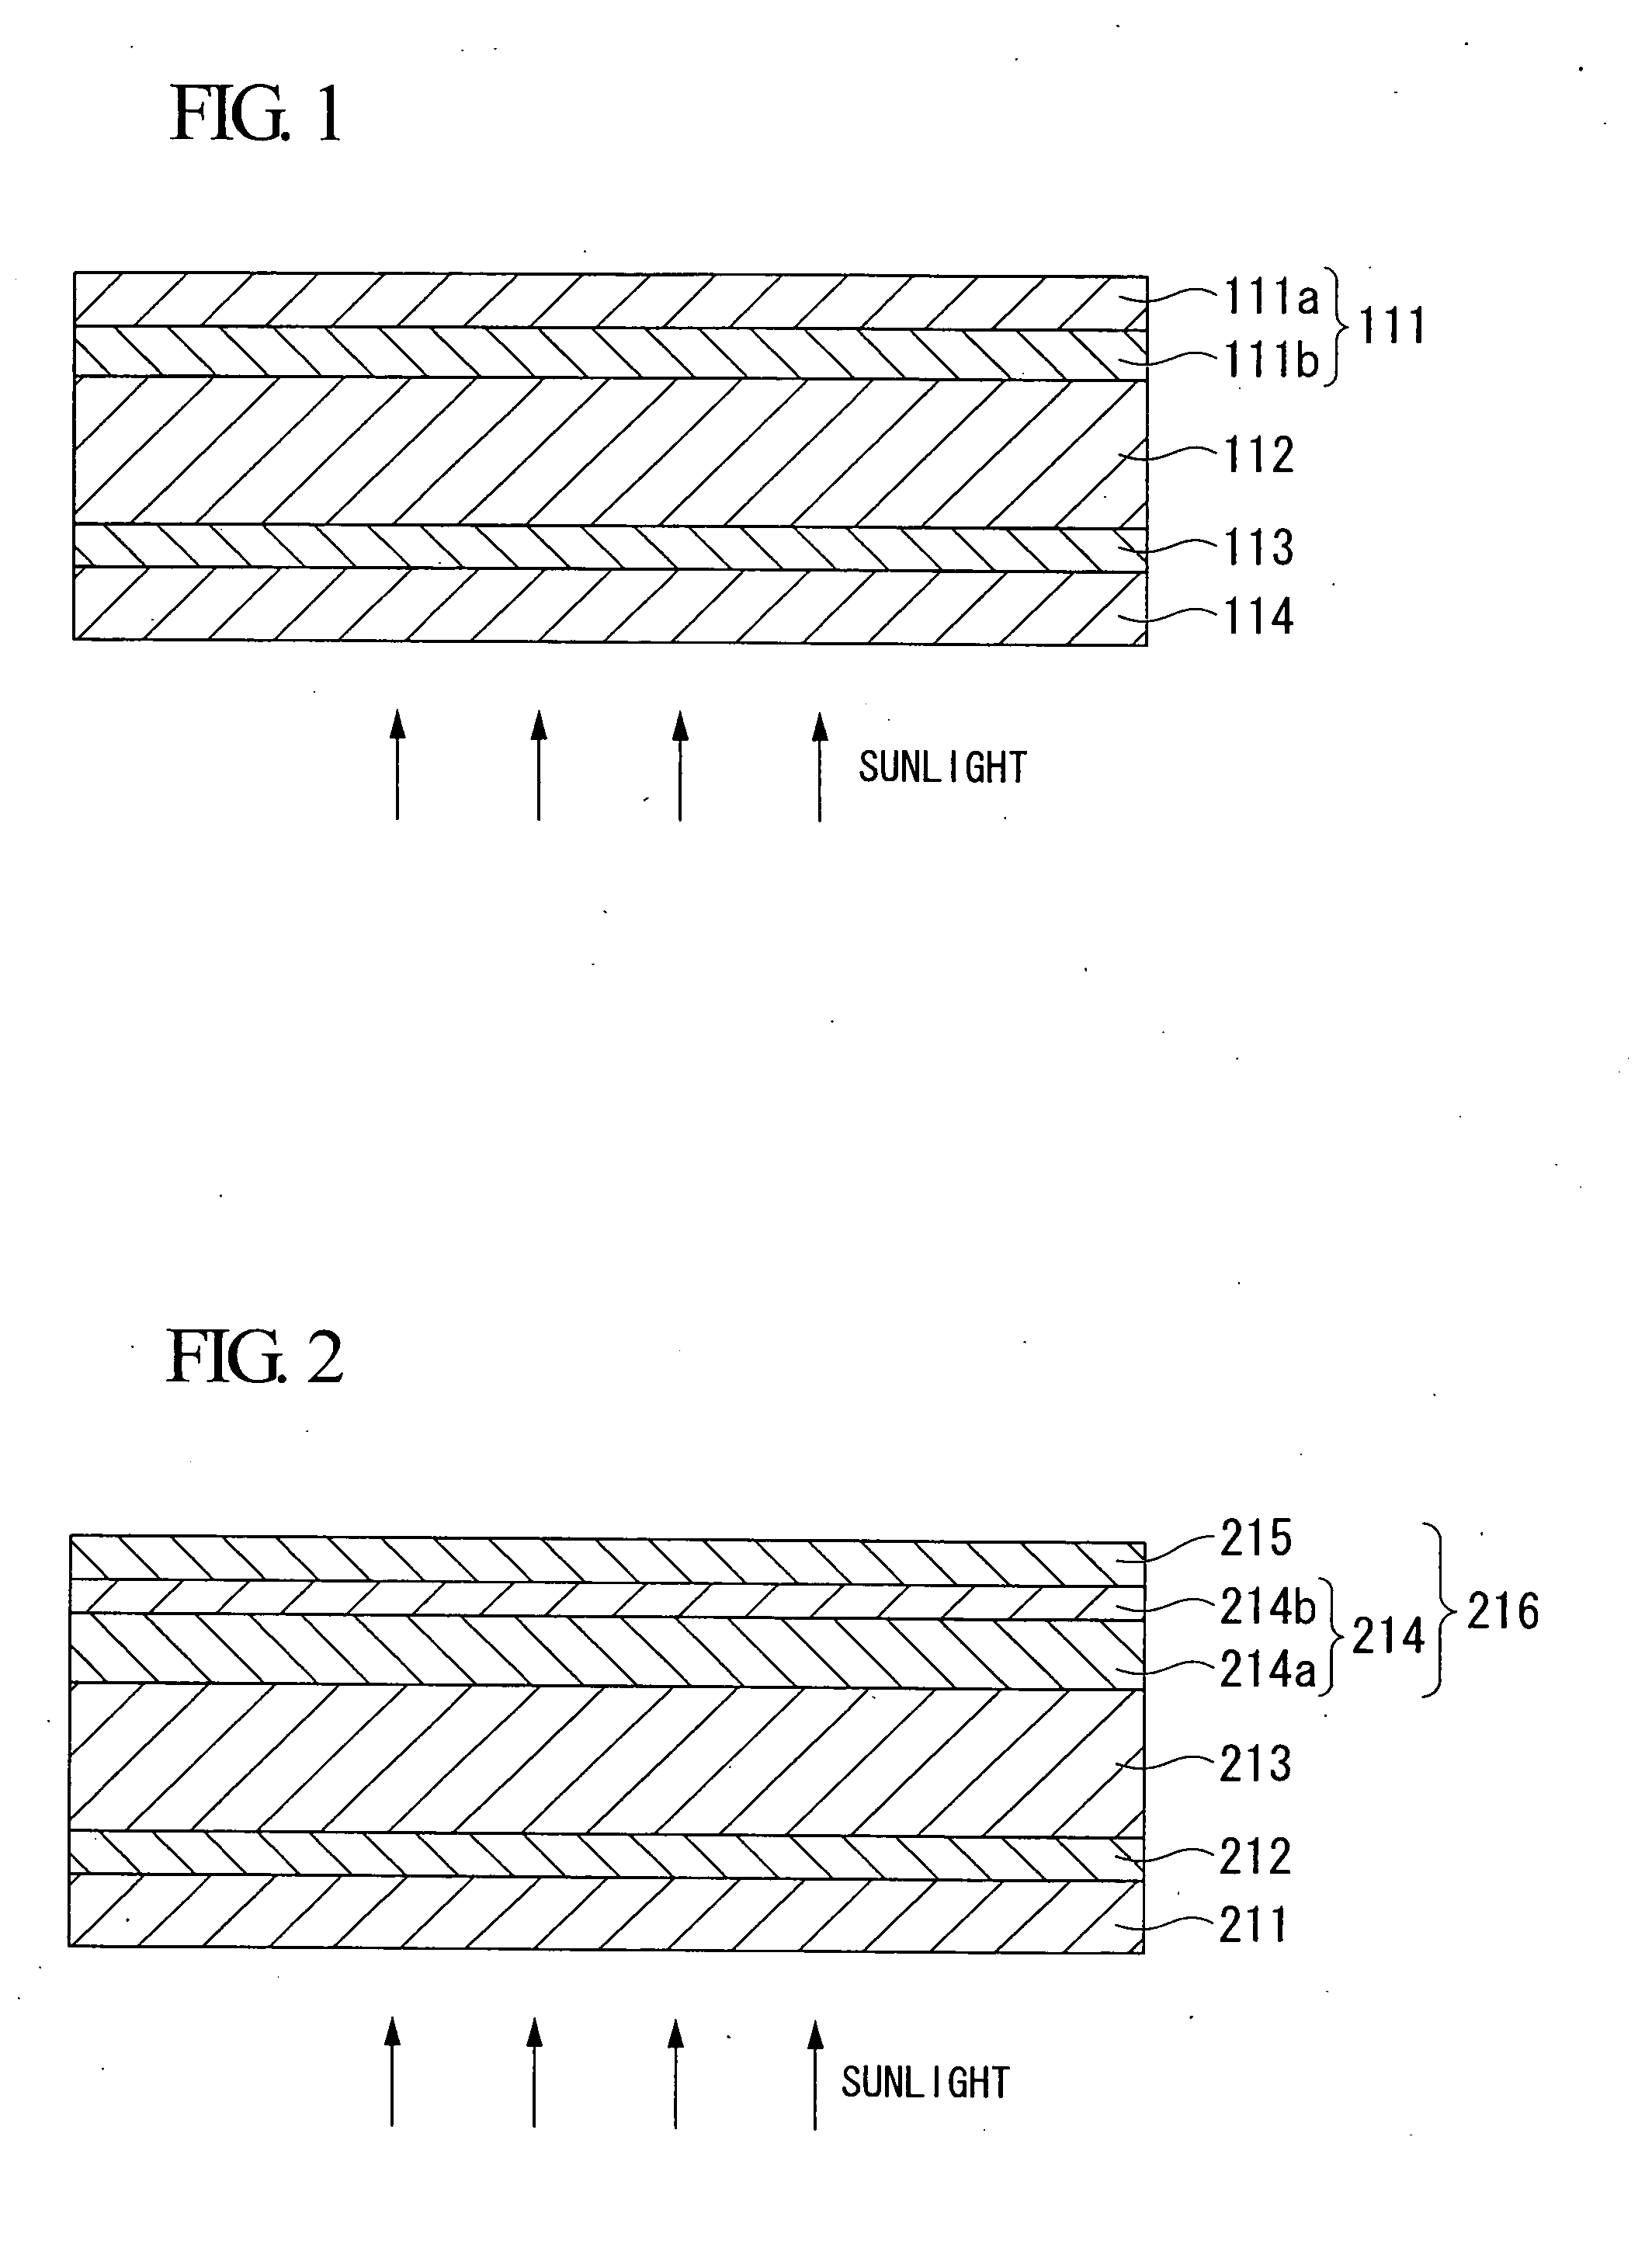 Comppsite film for superstrate solar cell, method for producing the composite film for superstrate solar cell, composite film for substrate solar cell, and method for porducing the composite film for substrate solar cell